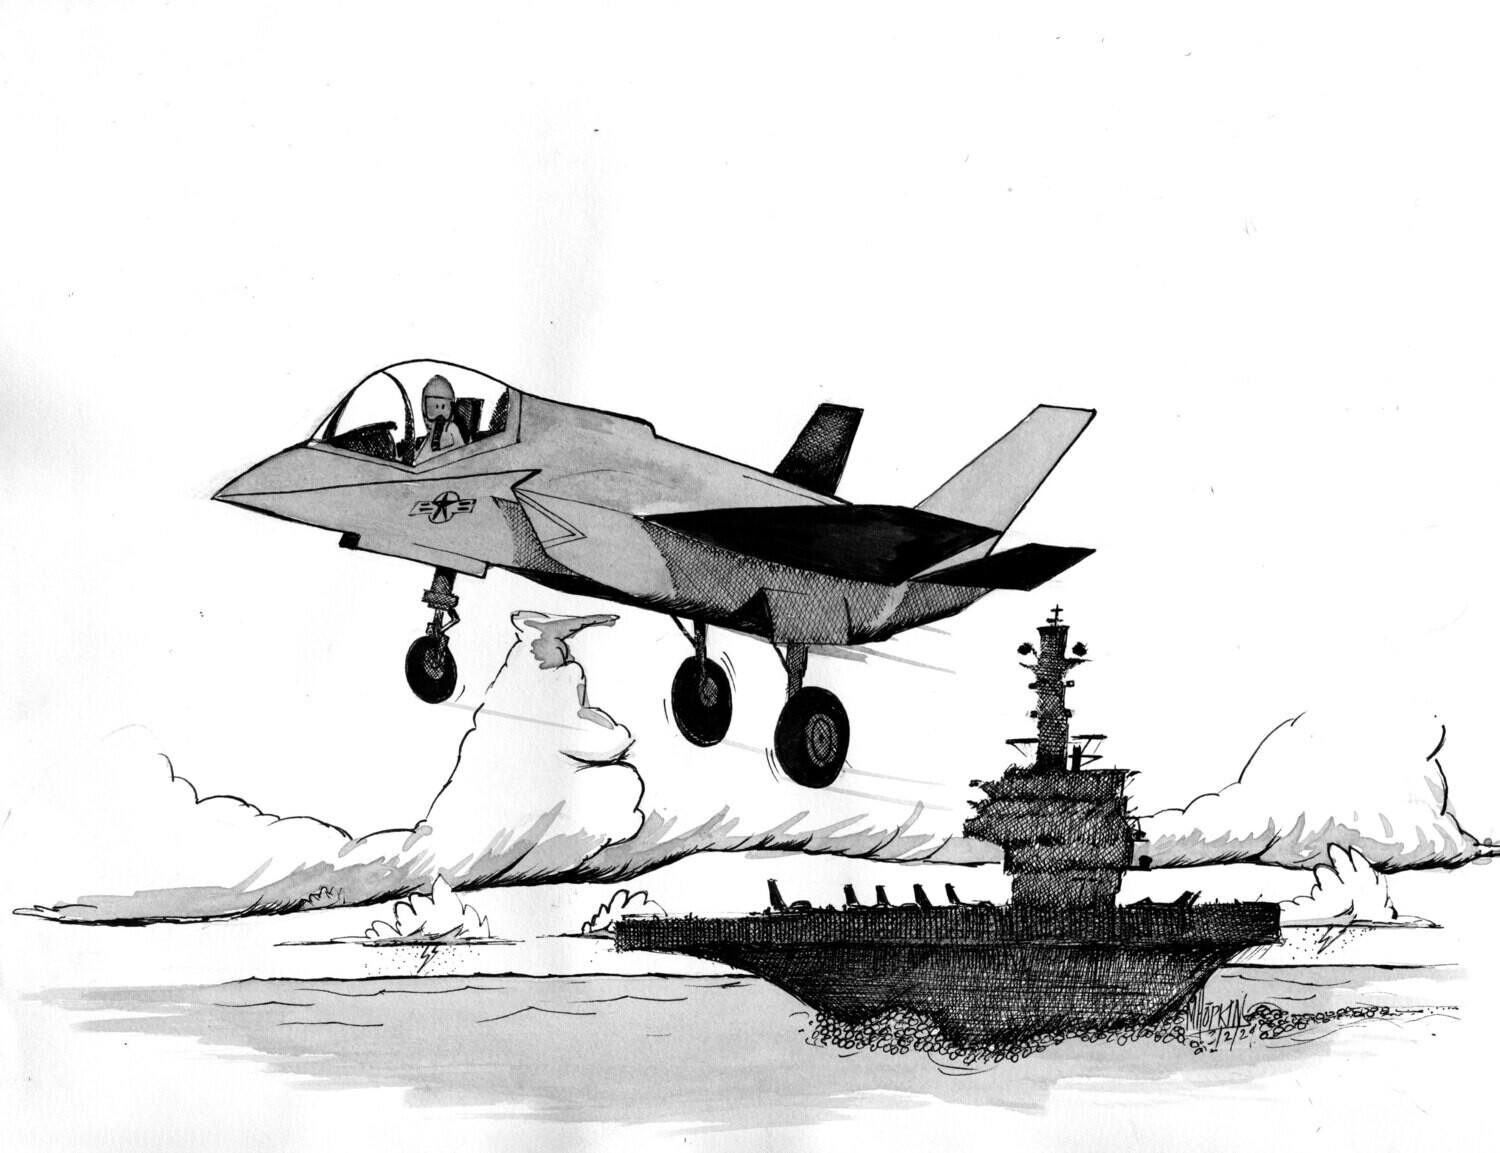 Lockheed Martin F-35C Lightning II - 11" x 14" and 8" x 10" Aviation Caricature Limited Edition Prints by Michael Hopkins